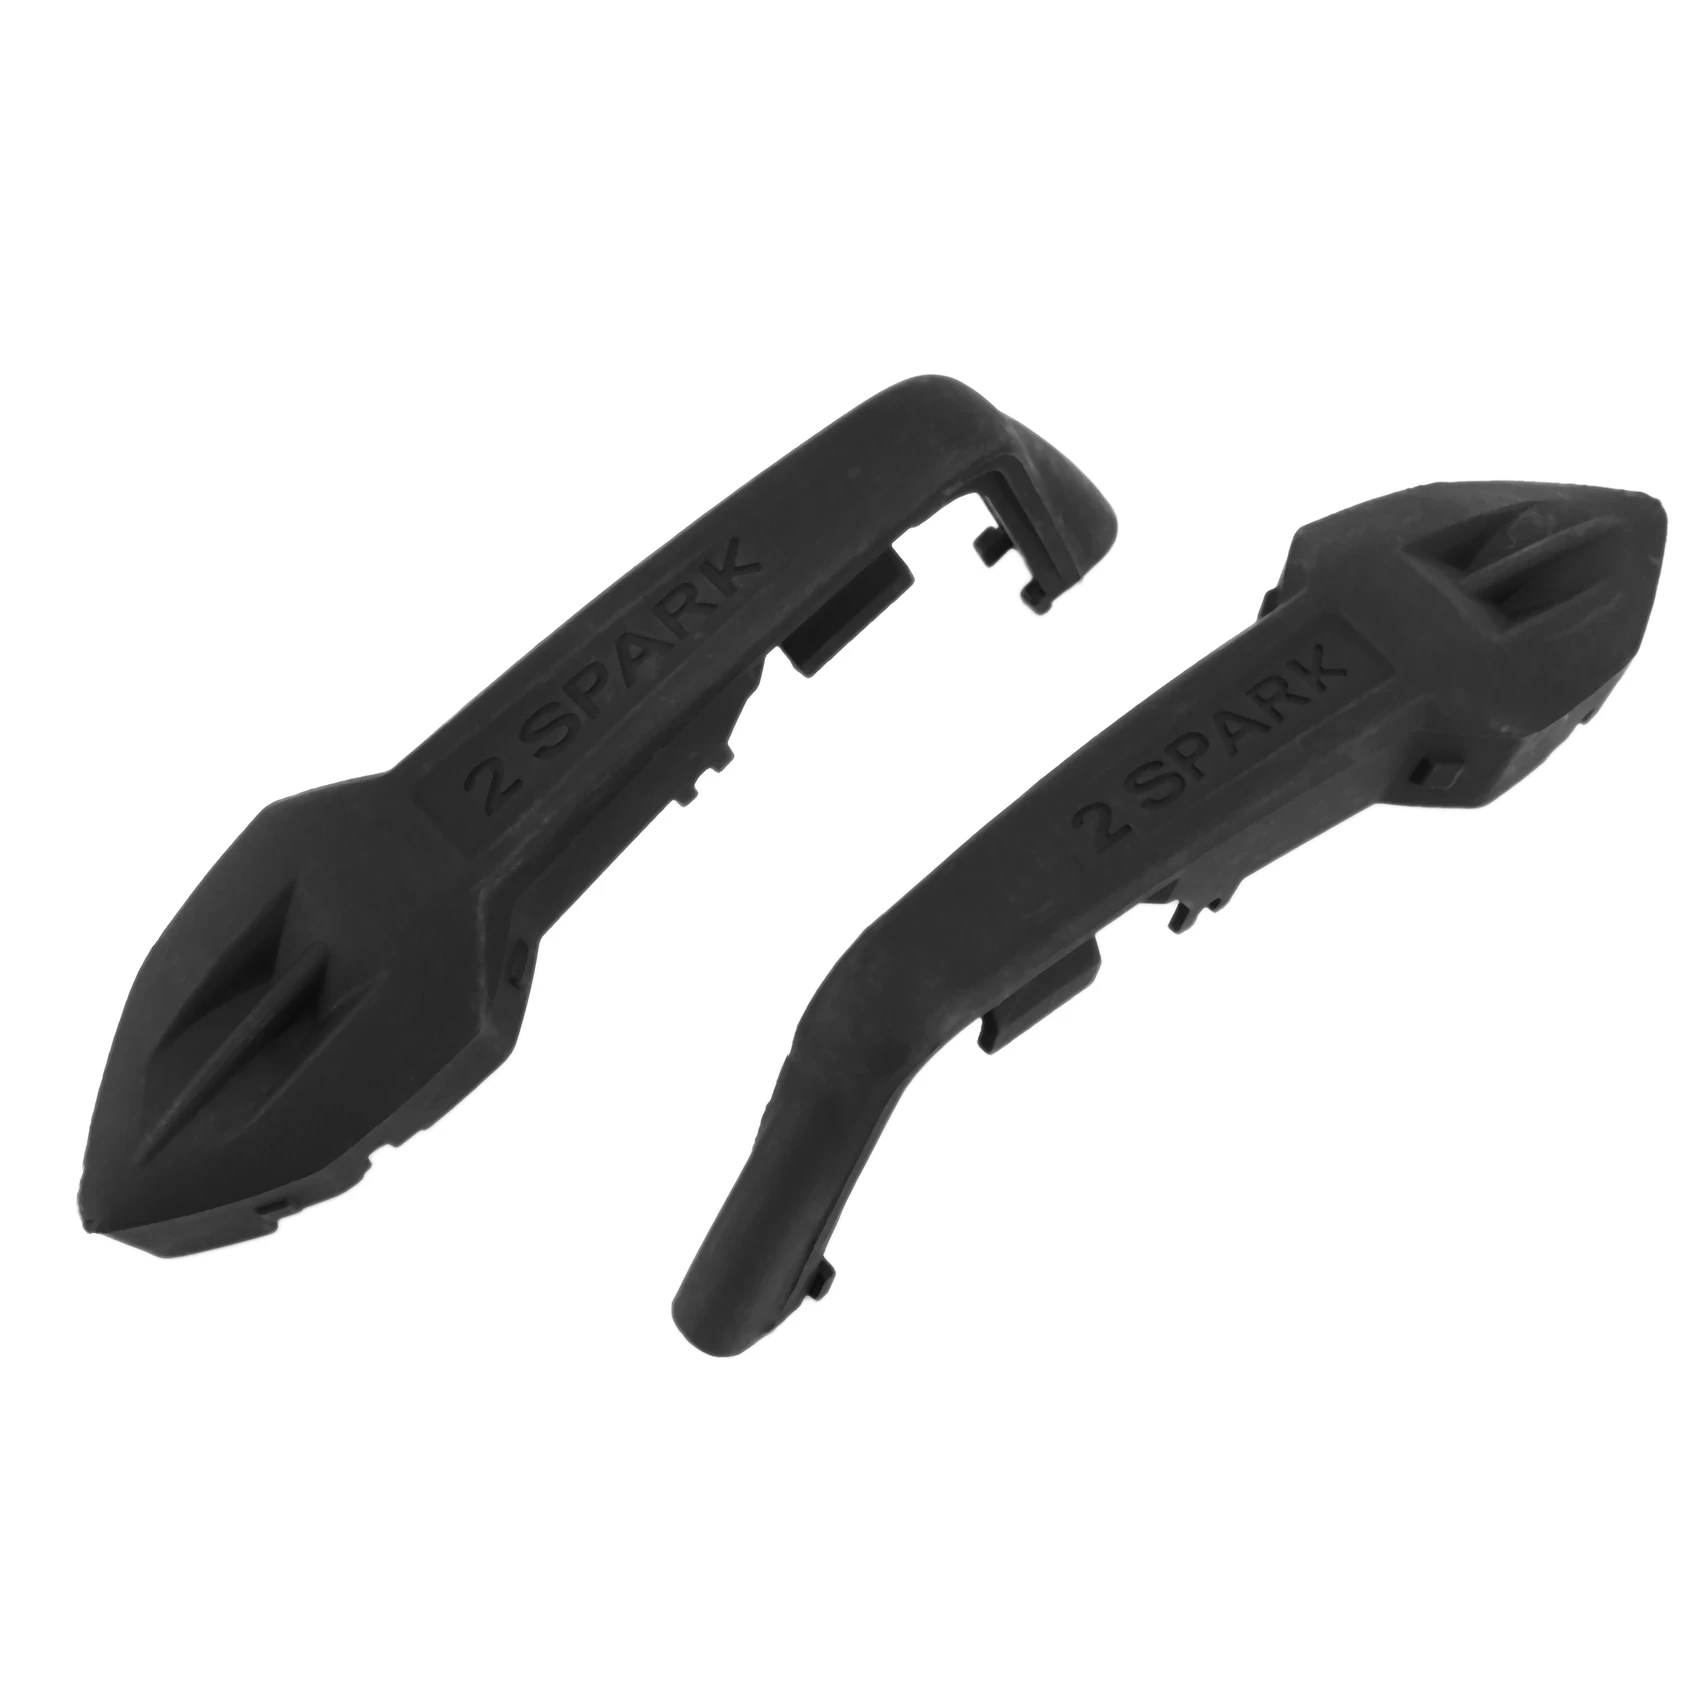 

Ignition Plug Cover Frame Guards Buffer for BMW R1200GS Adventure R1200RT R900RT R1200R R1200ST R 1200 900 GS/R/RT/S